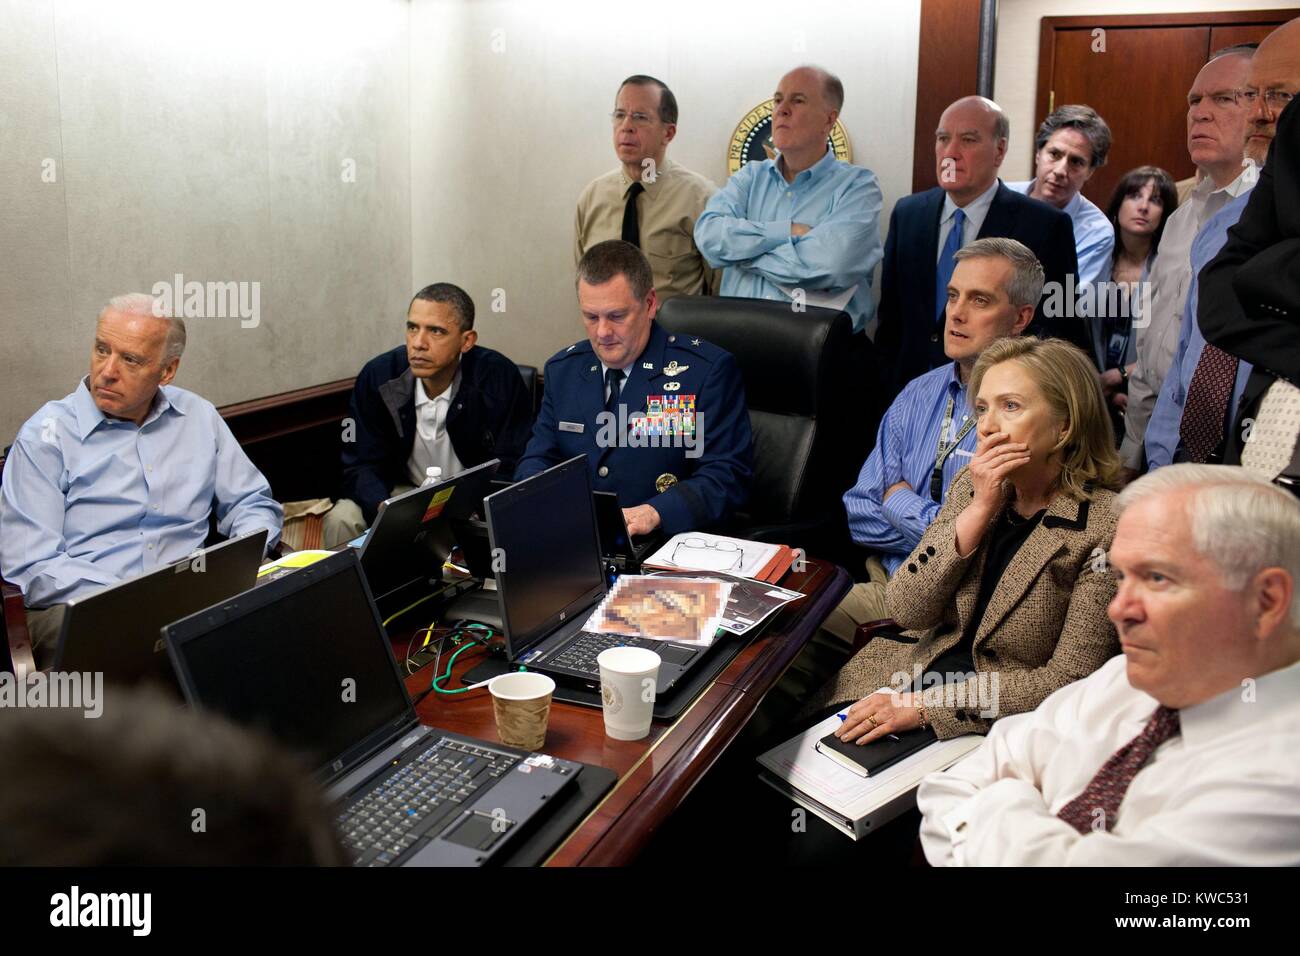 'Operation Neptune's Spear,' the mission against Osama bin Laden, May 1, 2011. President Obama, VP Biden and the national security team receive an update in the Situation Room. Seated, L-R: VP Joe Biden; The President; Brig. Gen. Marshall Webb, USAF, Joint Special Operations Command; Denis McDonough, Deputy National Security Advisor; Hillary Clinton, Sec. of State; and Robert Gates, Sec. of Defense. Standing, L-R: Admiral Mike Mullen, USN, Chmn. Joint Chiefs; Tom Donilon, National Security Advisor; Bill Daley, Chief of Staff; Tony Blinken, Nat. Security Advisor to VP; Audrey Tomason, Dir. For  Stock Photo